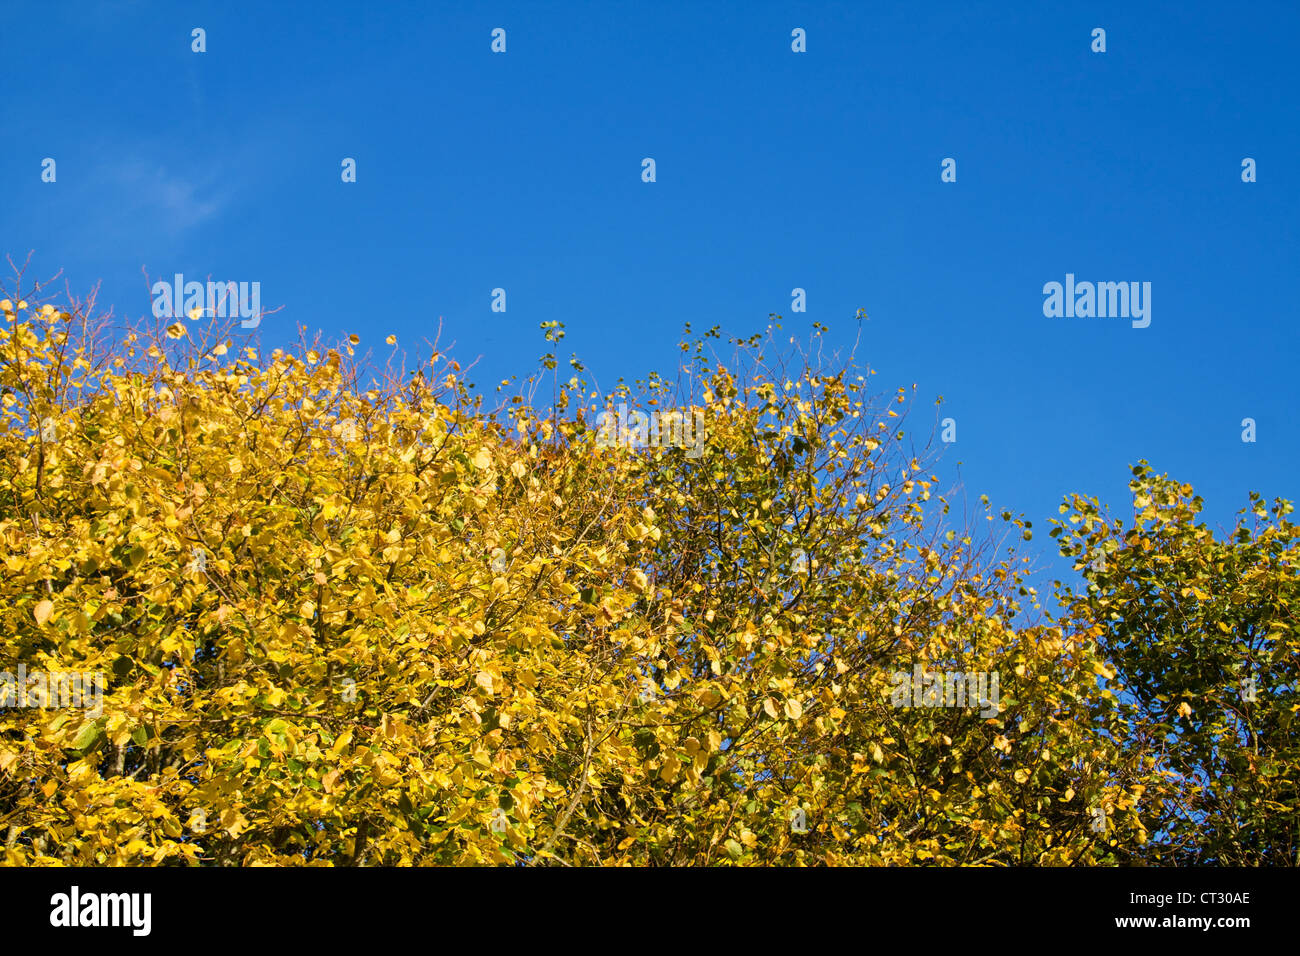 Beauty of autumn with golden leaves and clear blue sky. Stock Photo